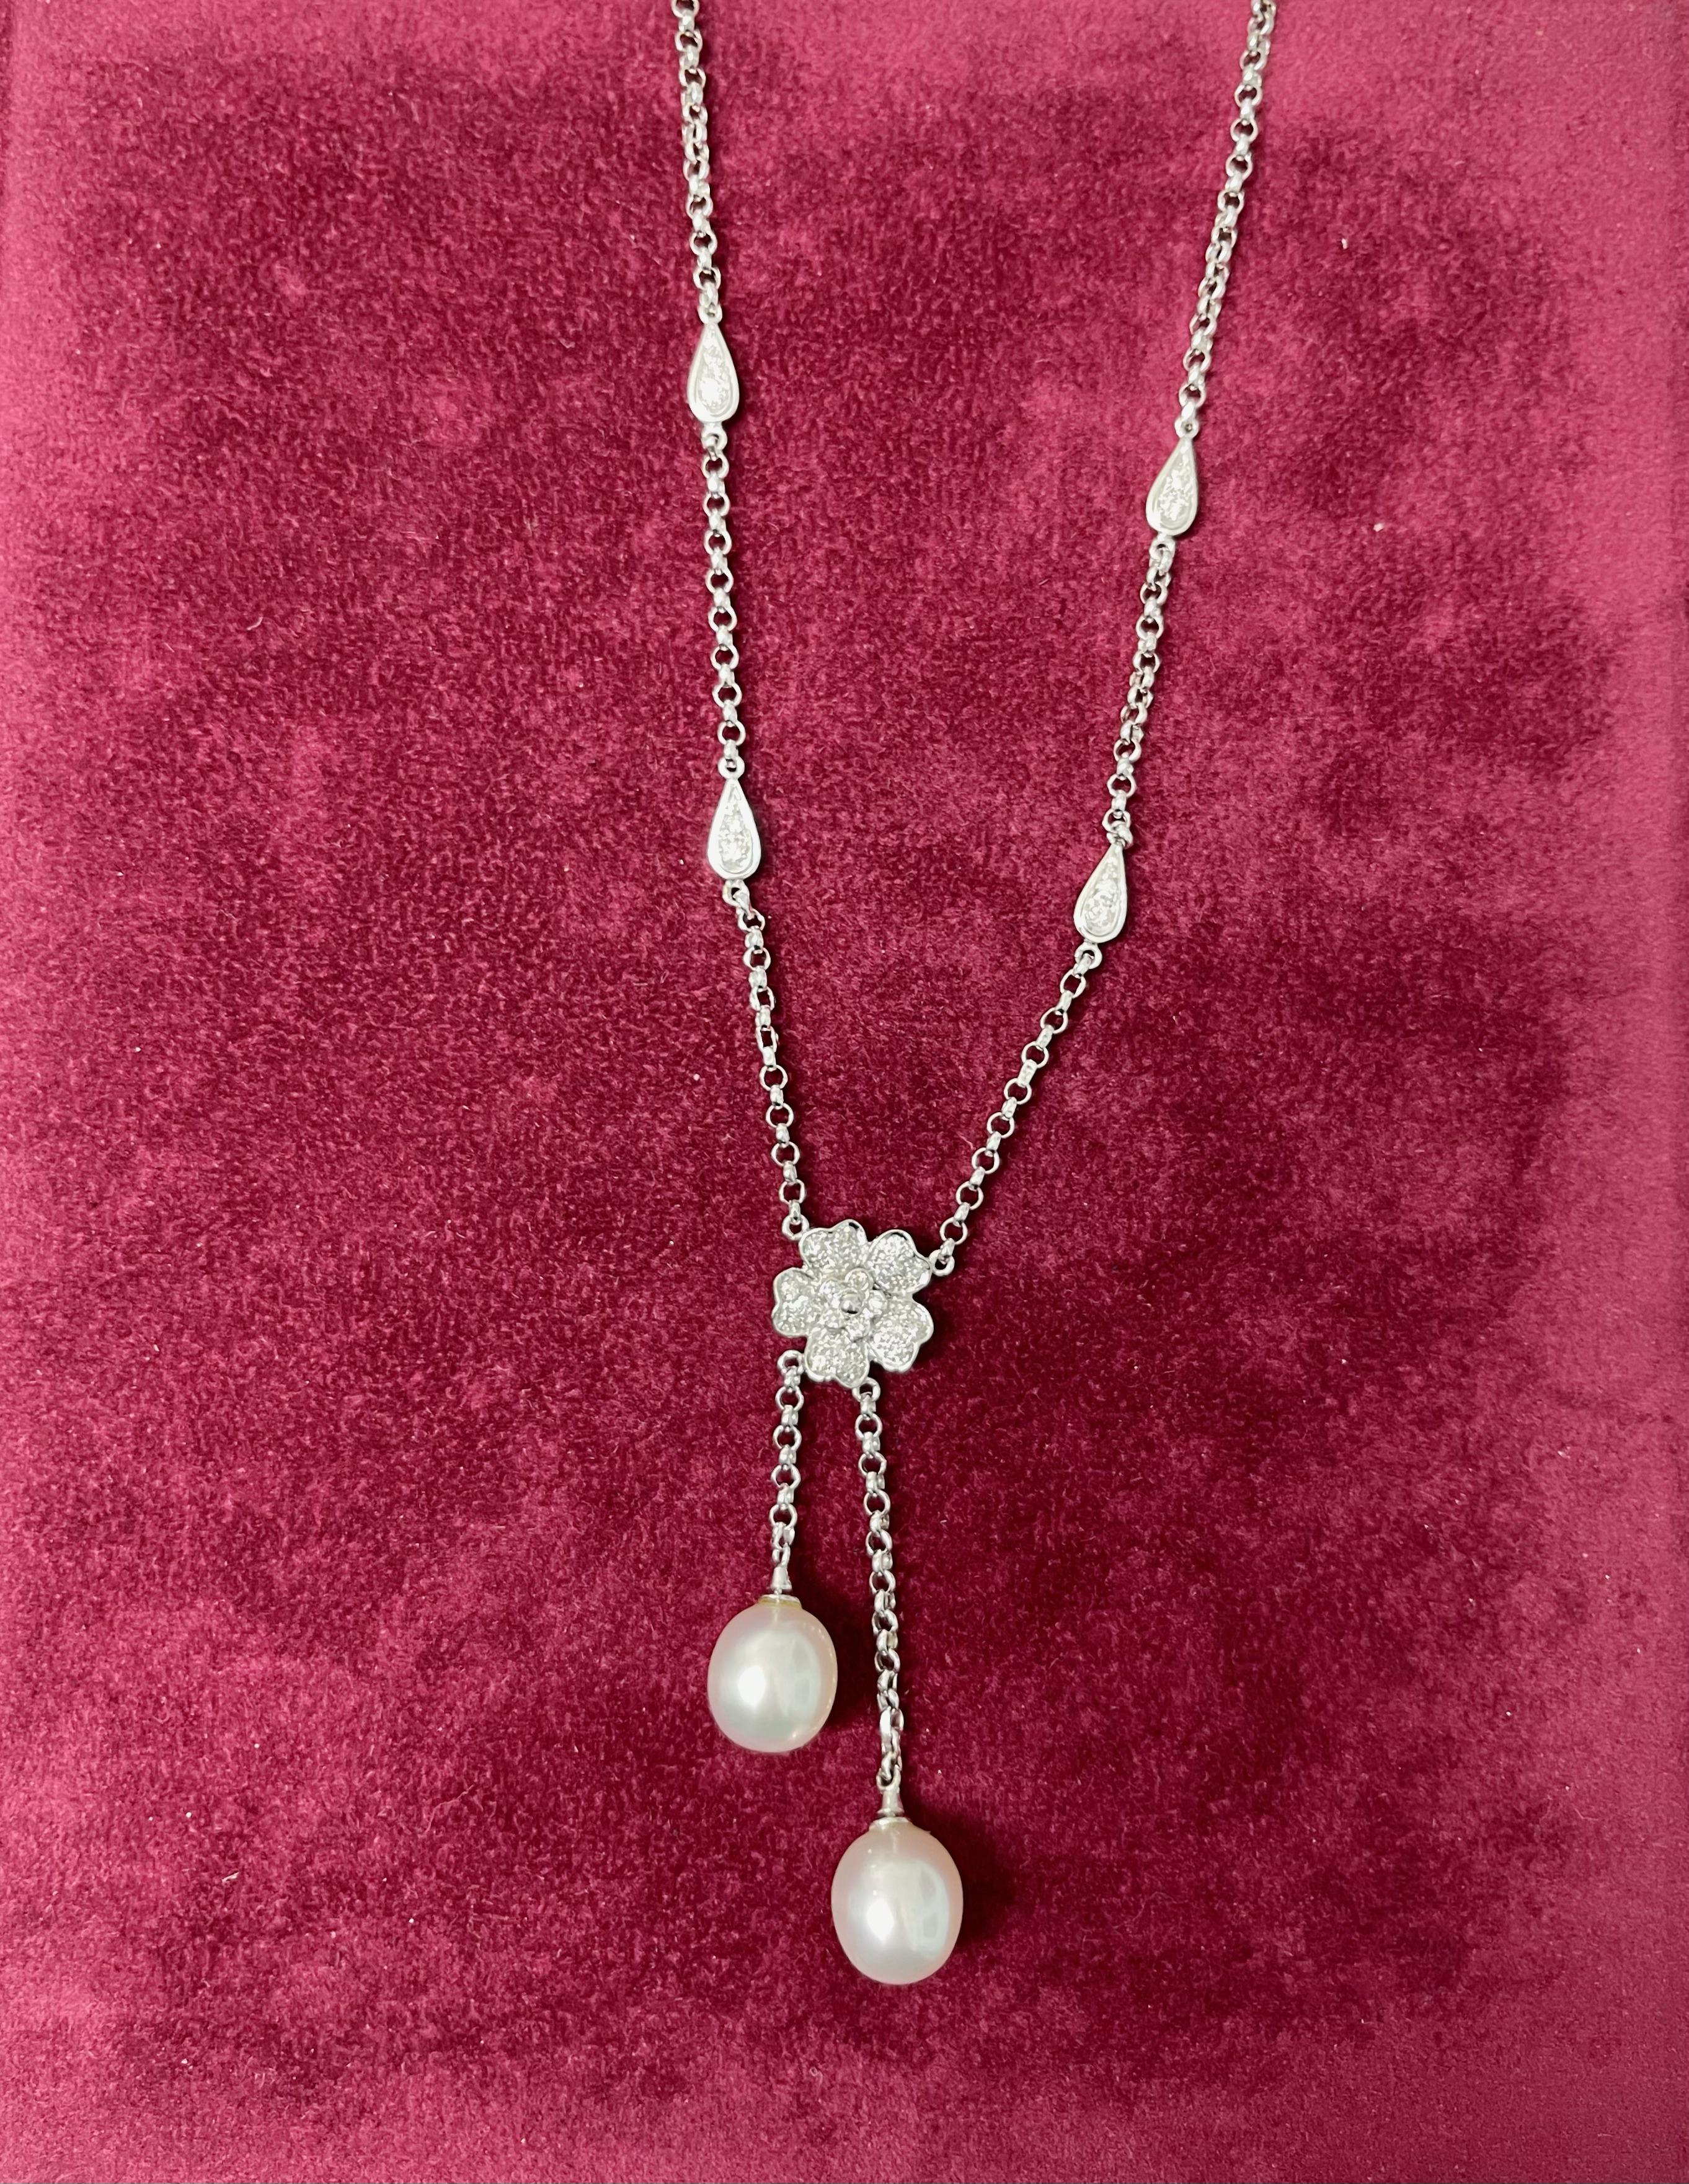 Beautiful and shining necklace made in 18 karat white gold embellished in the center by a flower covered by diamonds where two white pearl pendant from there.
The necklace is it also embellished by four drops, two on the left side and two on the